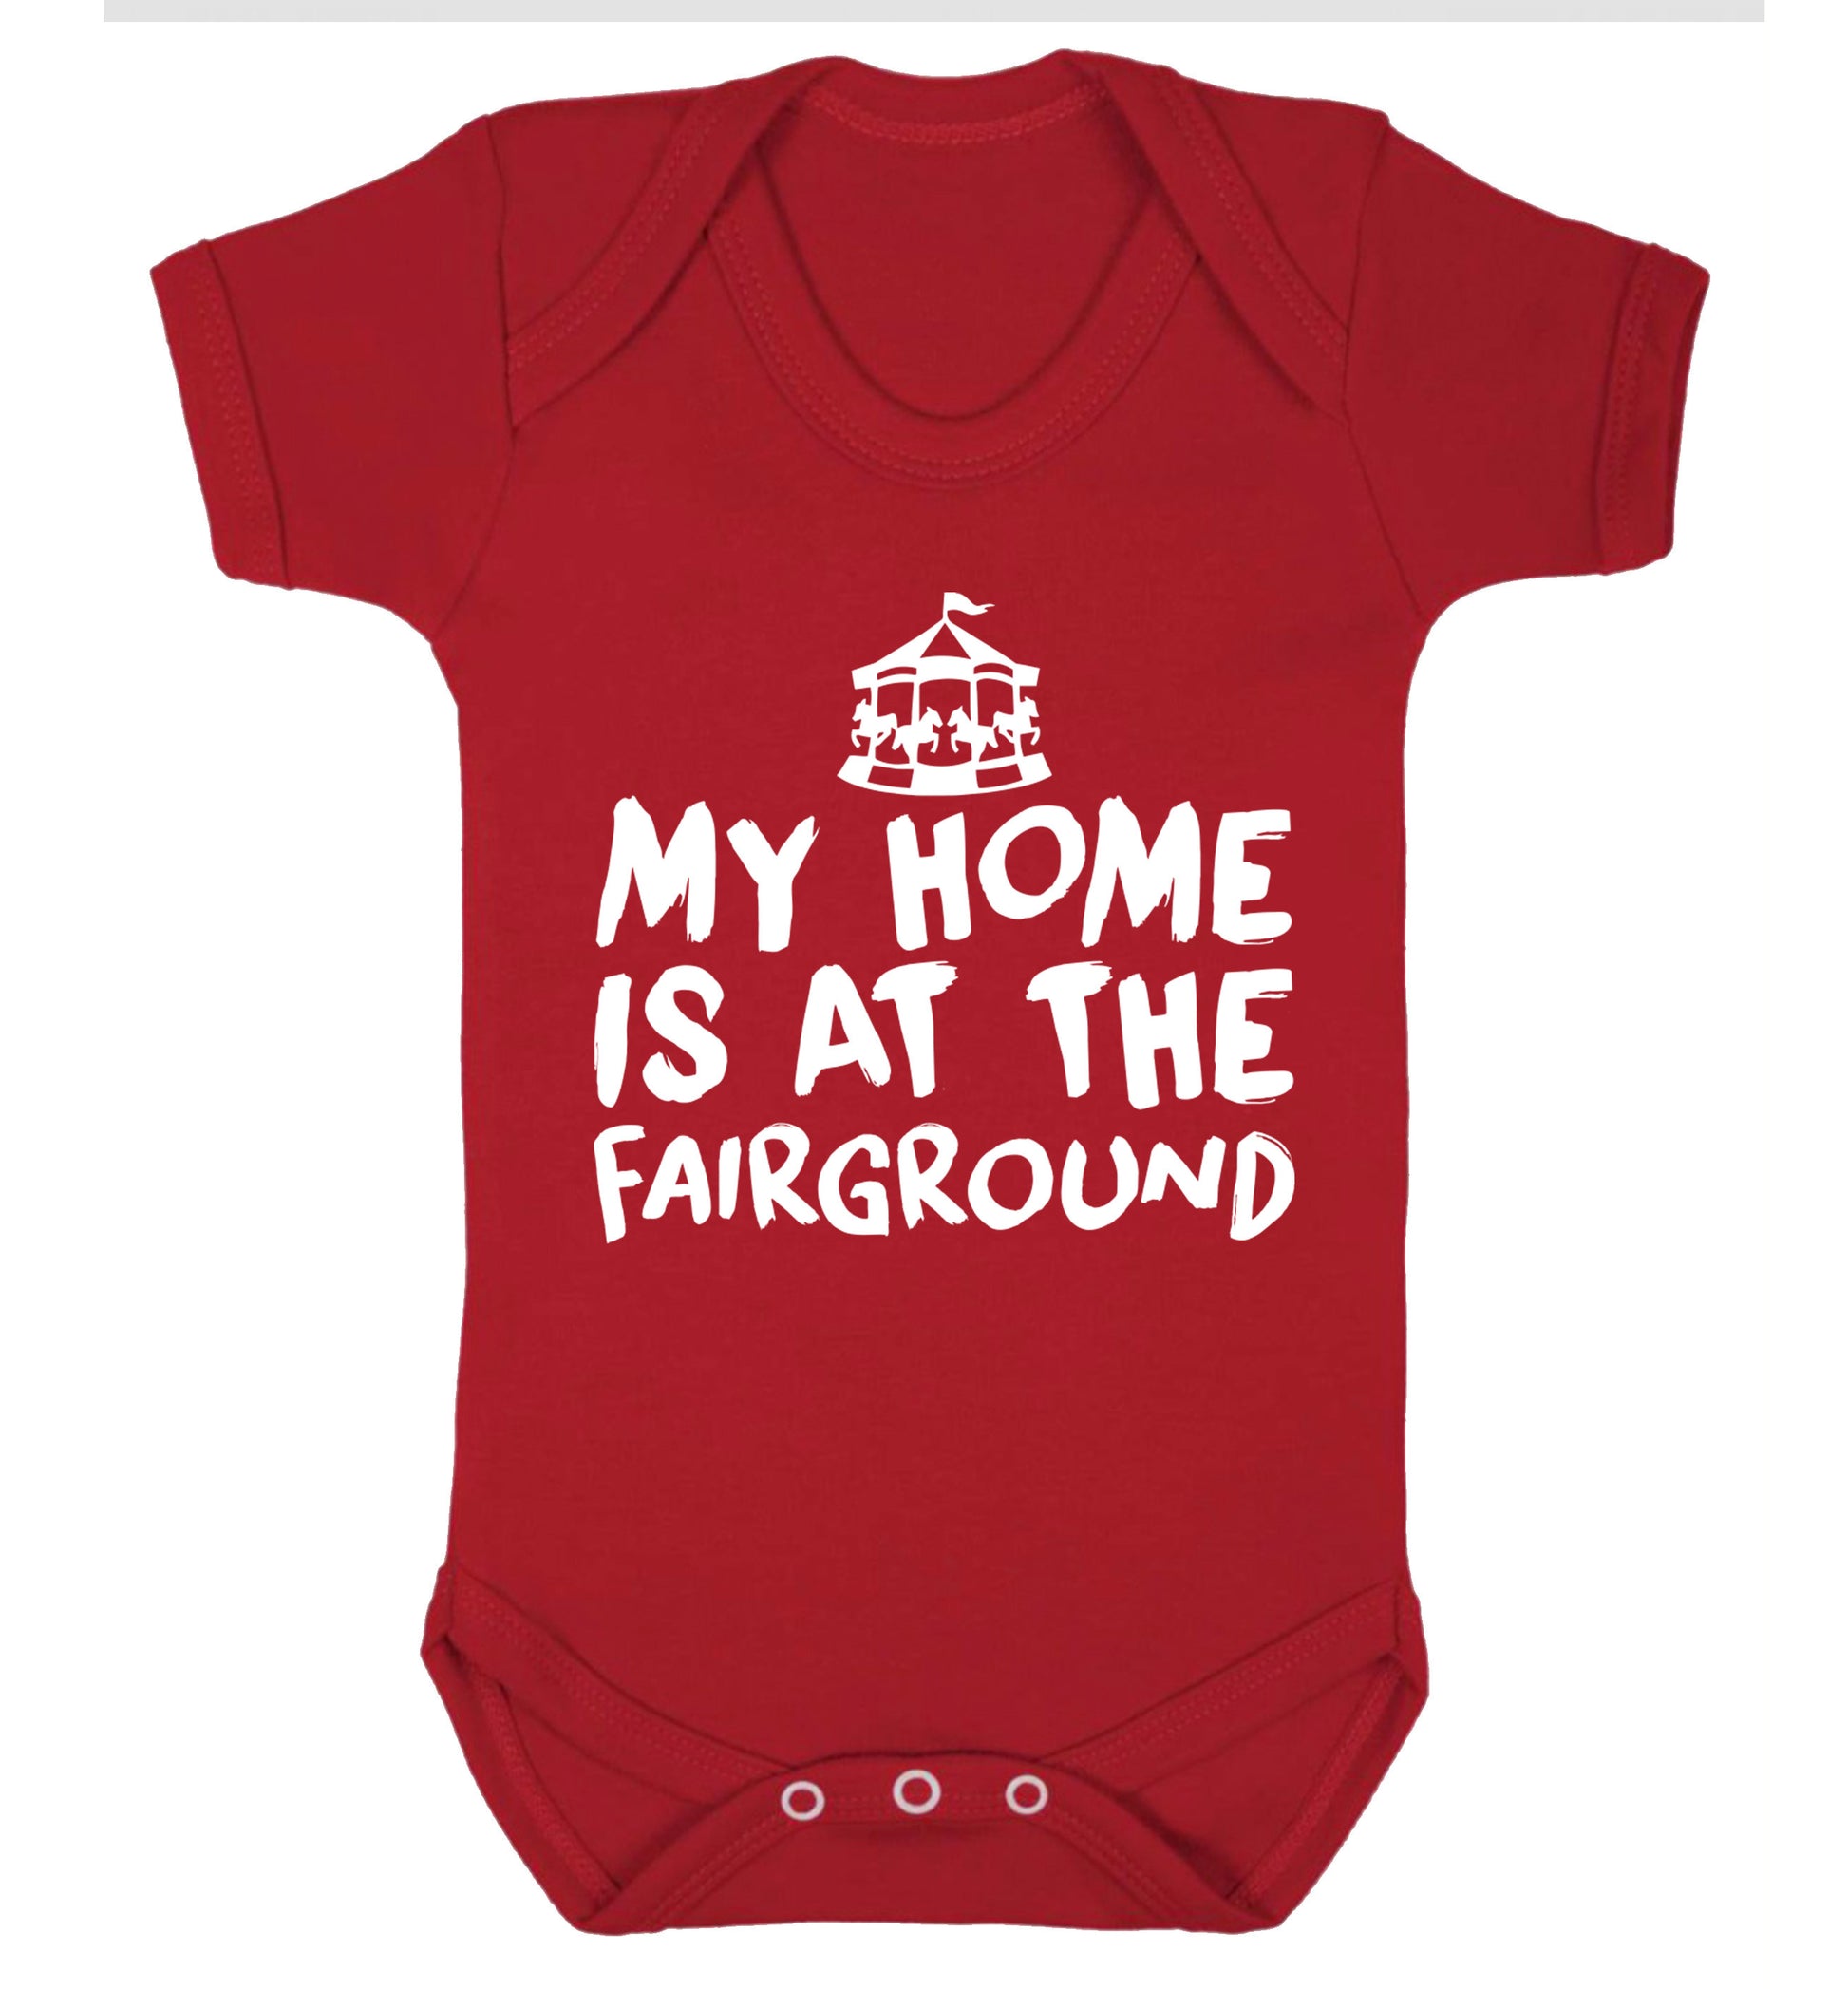 My home is at the fairground Baby Vest red 18-24 months